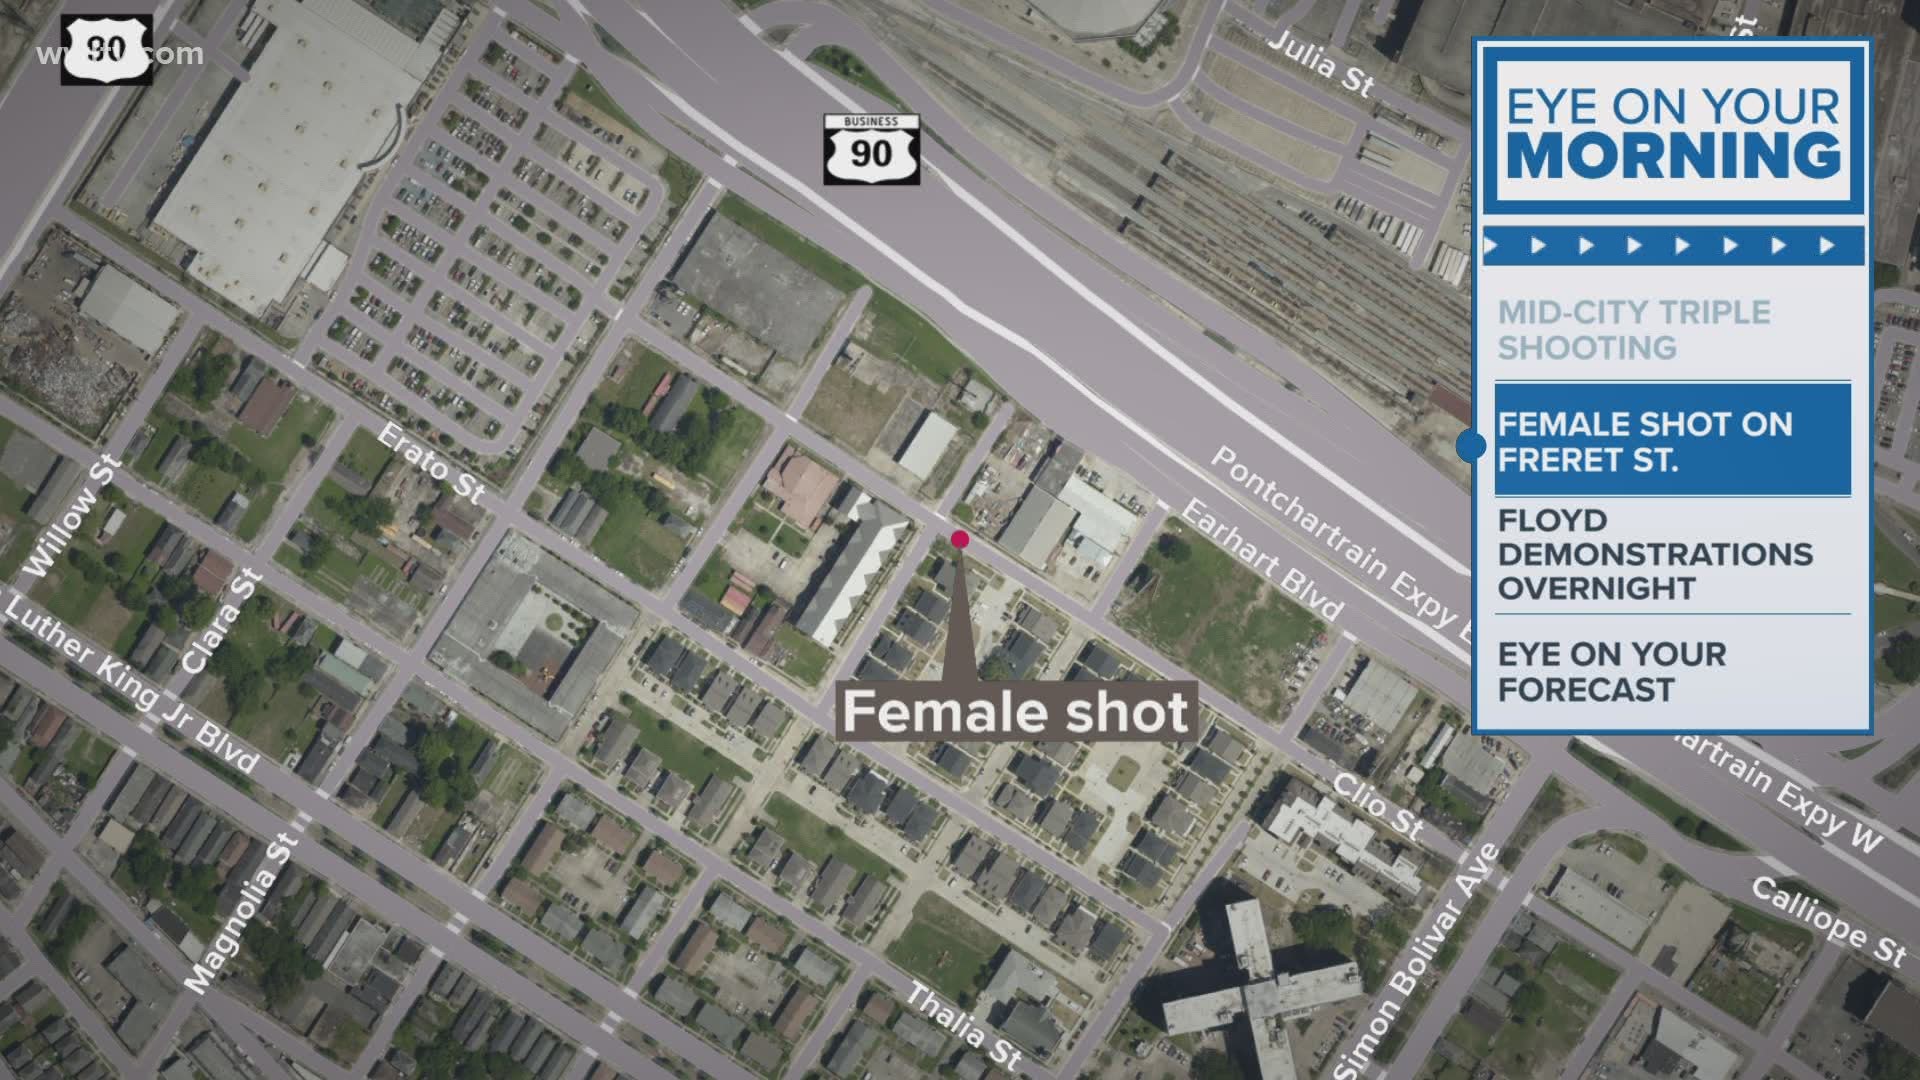 The woman was shot in the face, police officials say. Her condition was not immediately known.